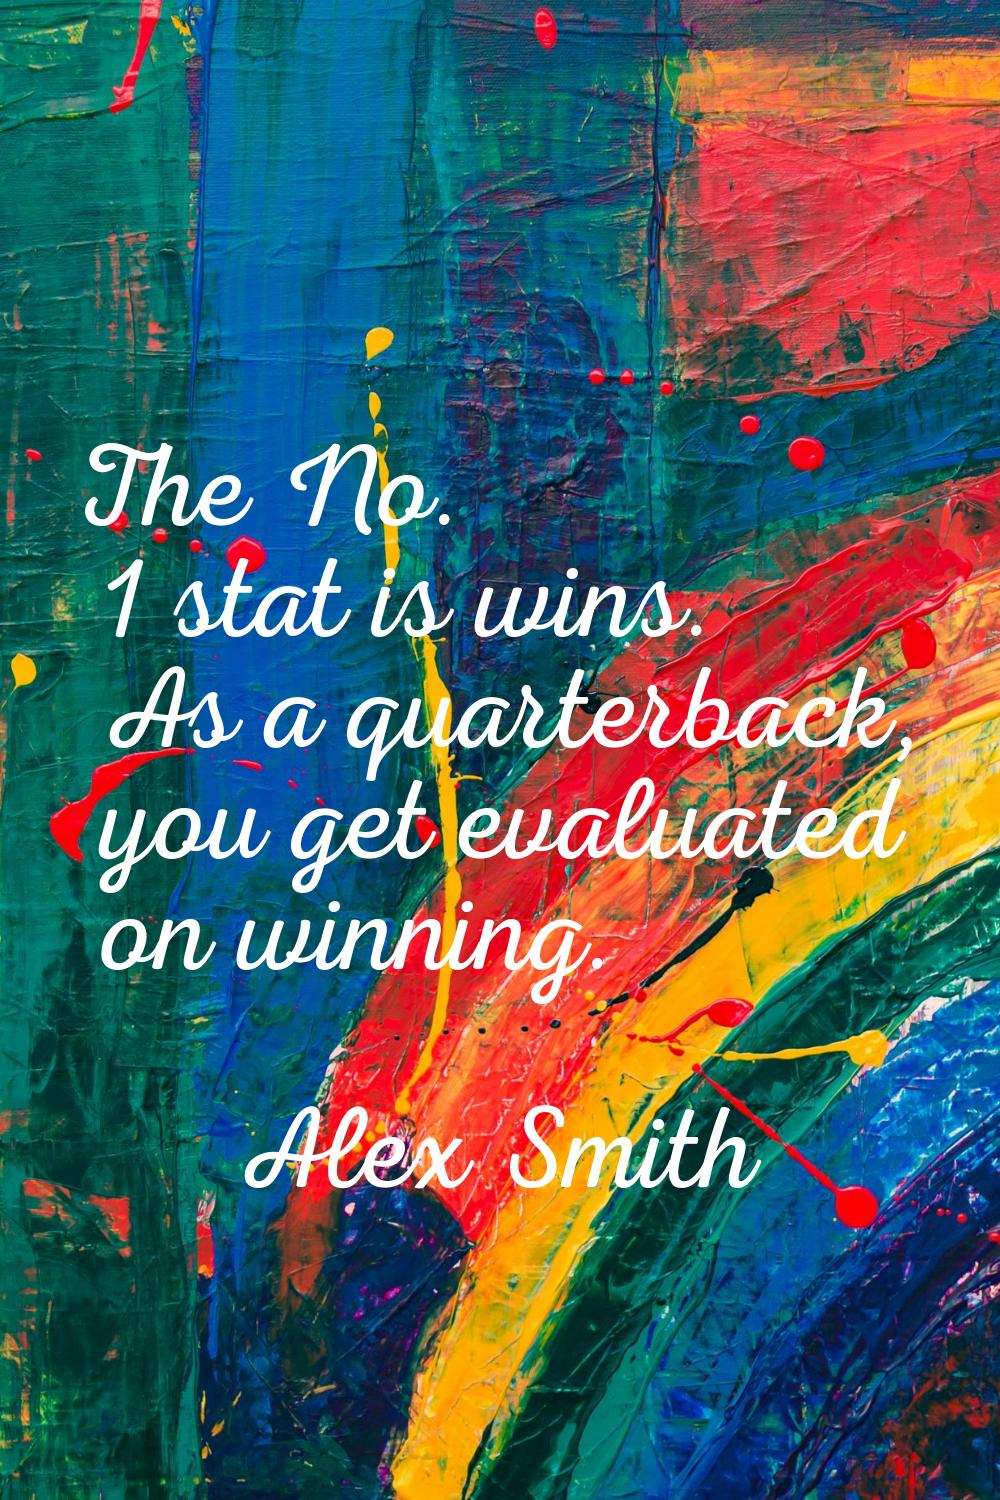 The No. 1 stat is wins. As a quarterback, you get evaluated on winning.